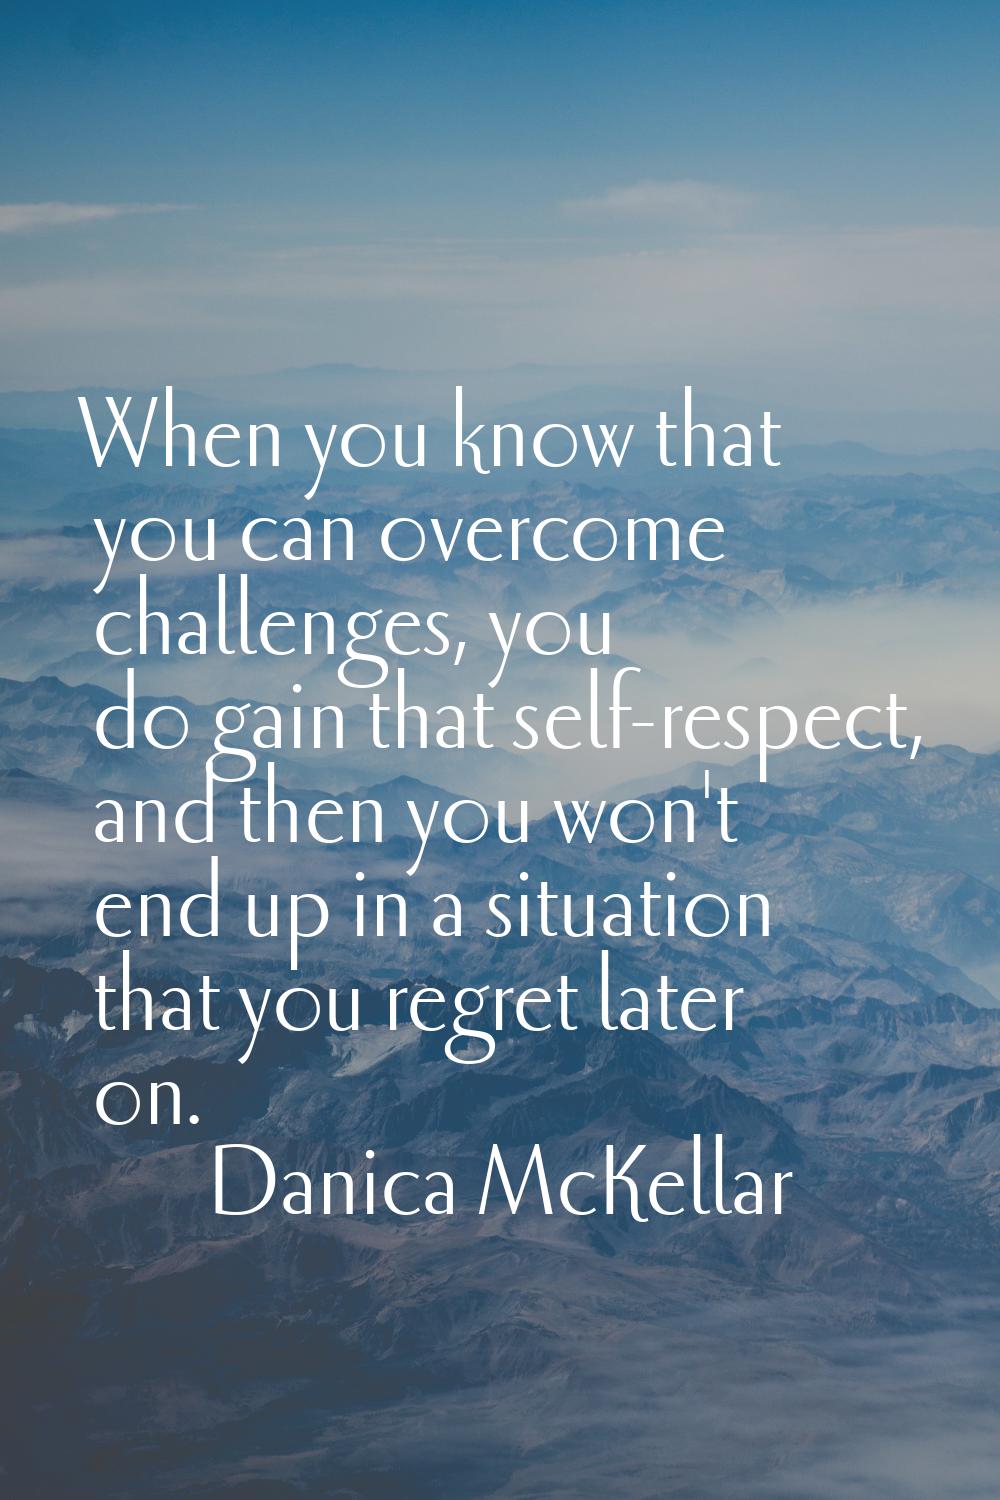 When you know that you can overcome challenges, you do gain that self-respect, and then you won't e